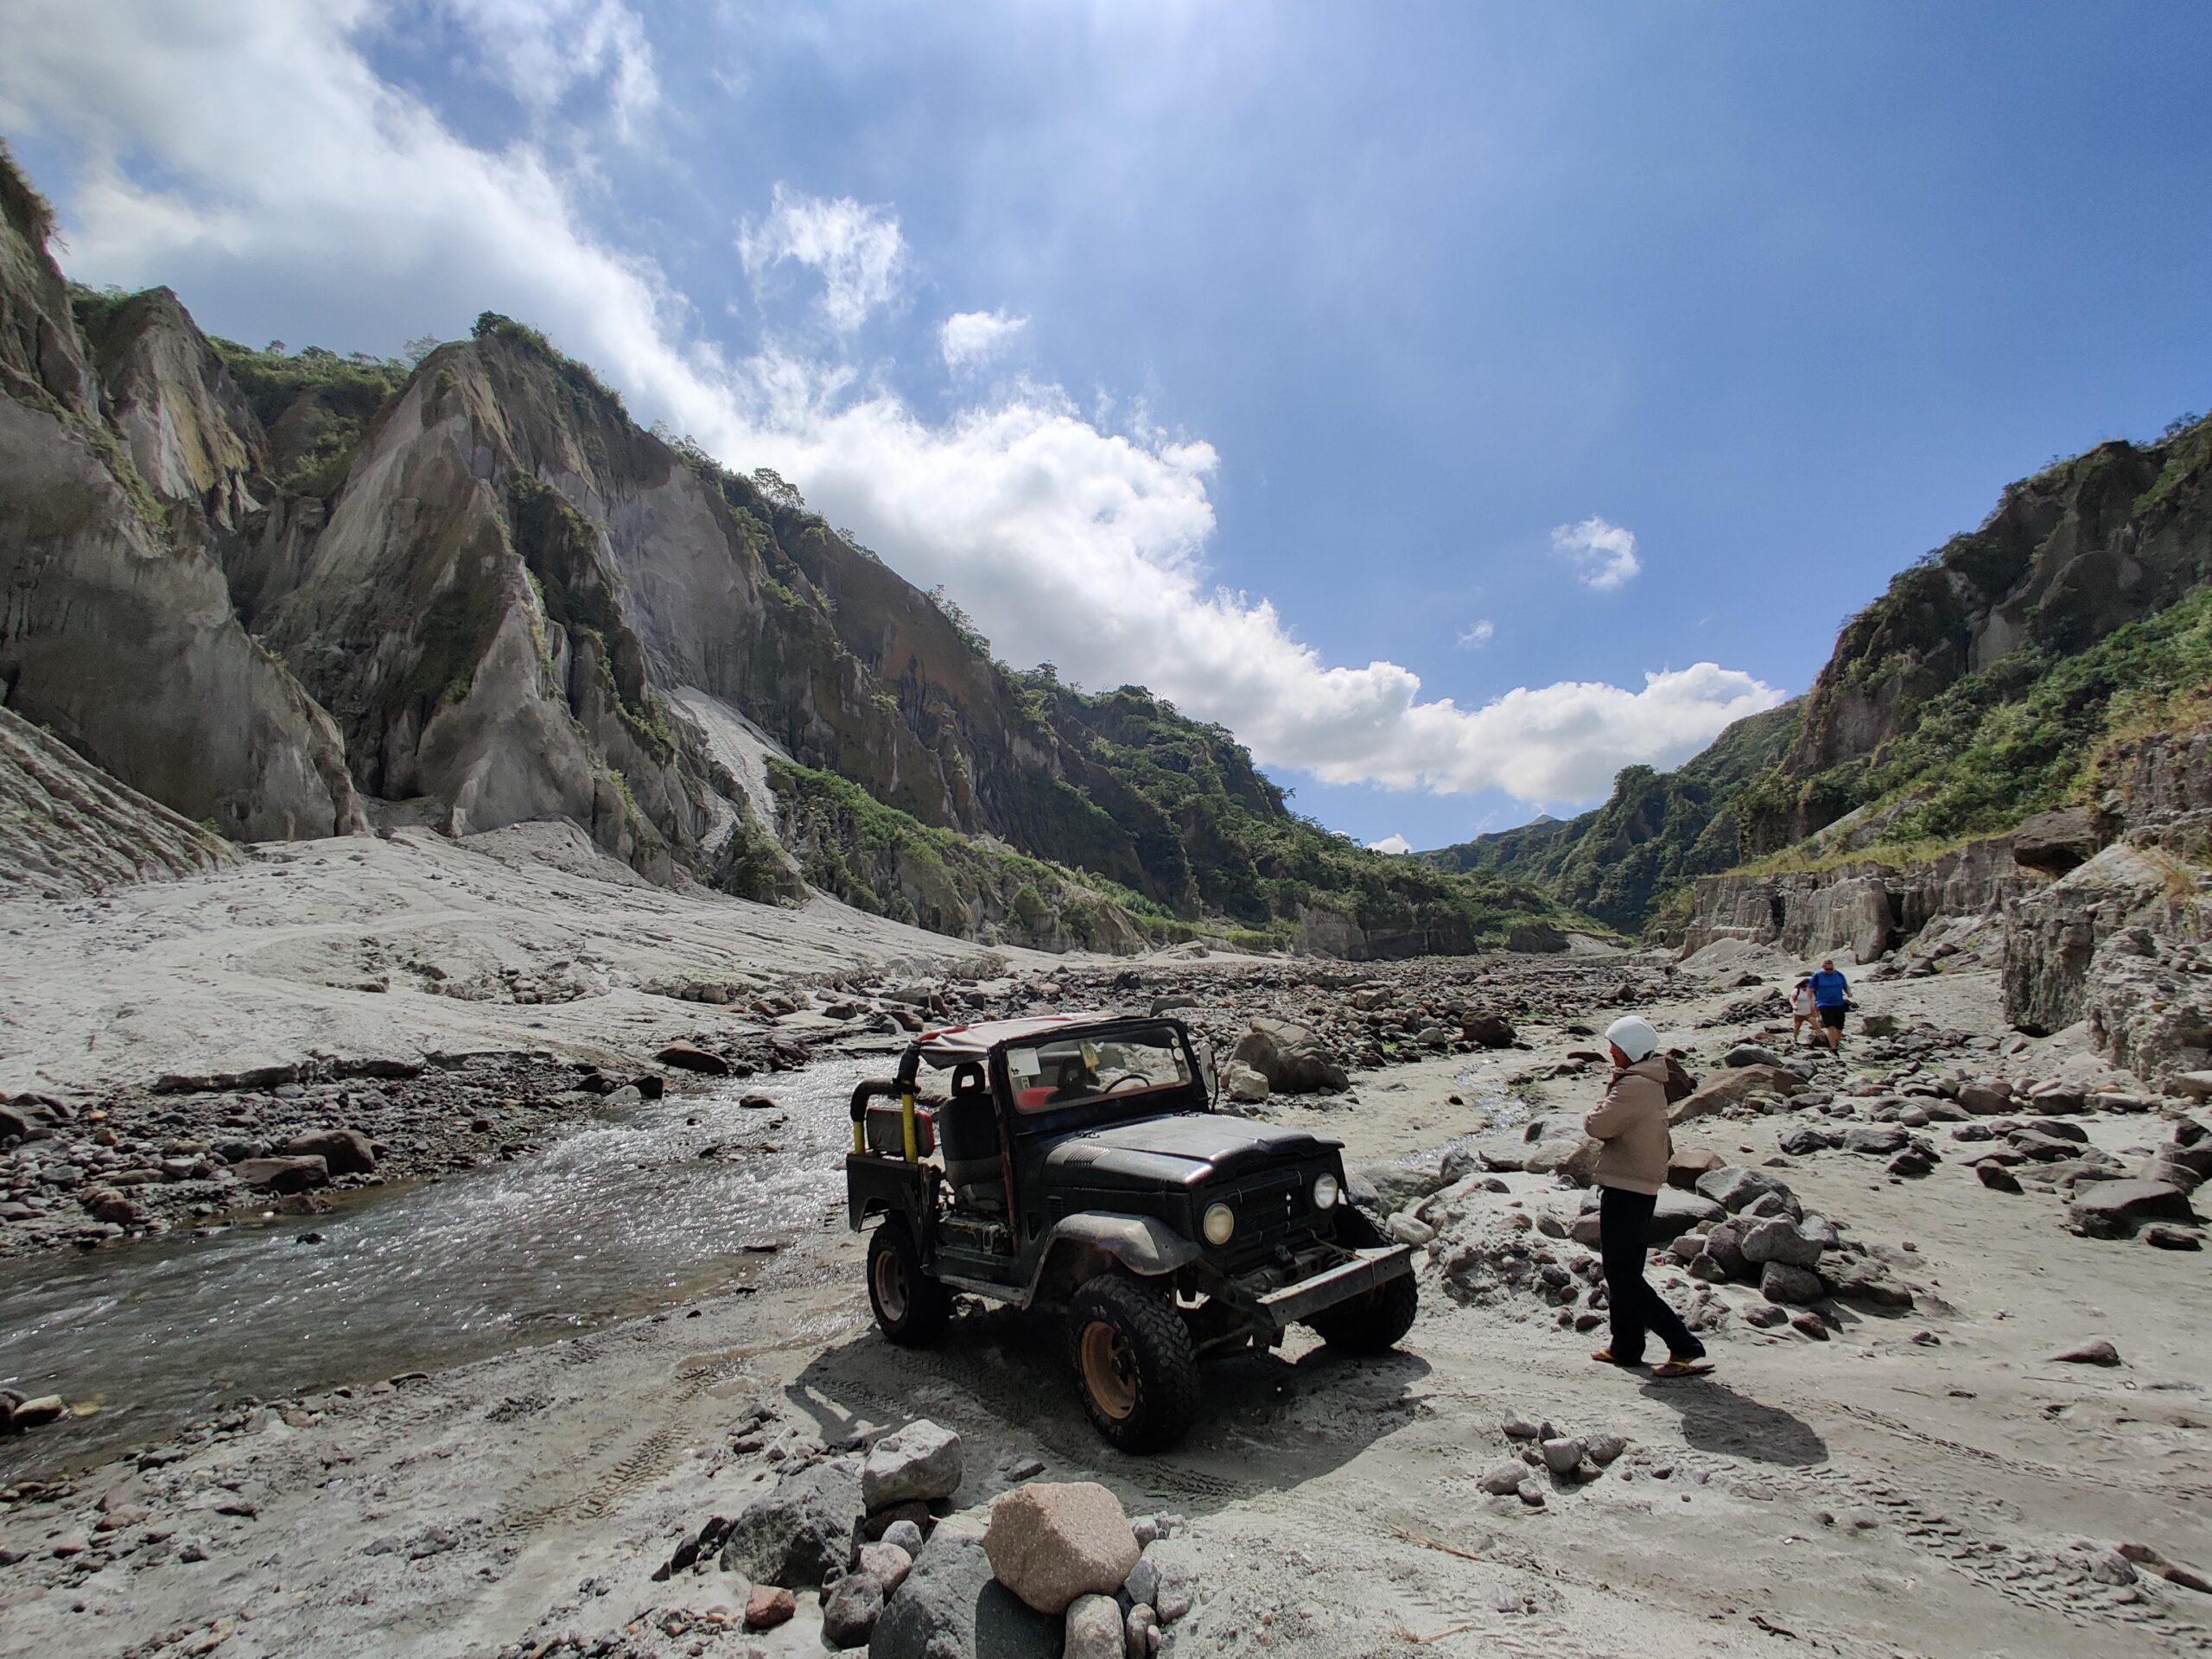 Mount Pinatubo - owner-type jeep